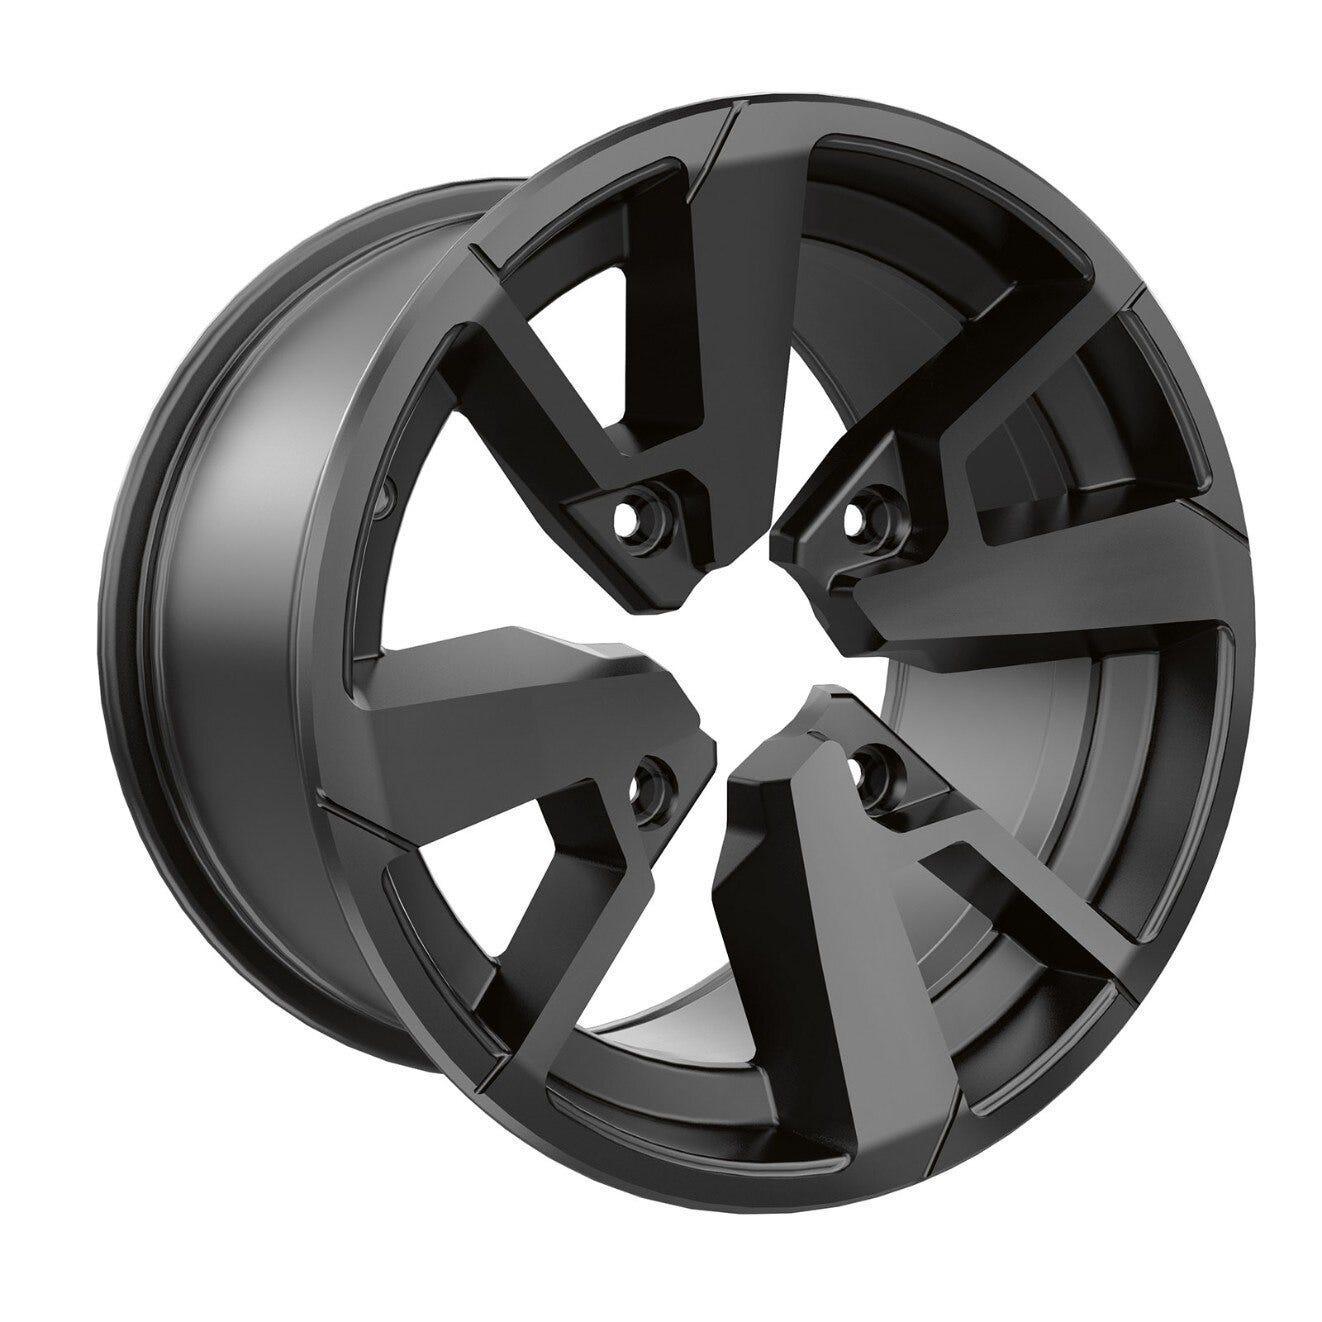 14" Rim - Rear / Black and machined